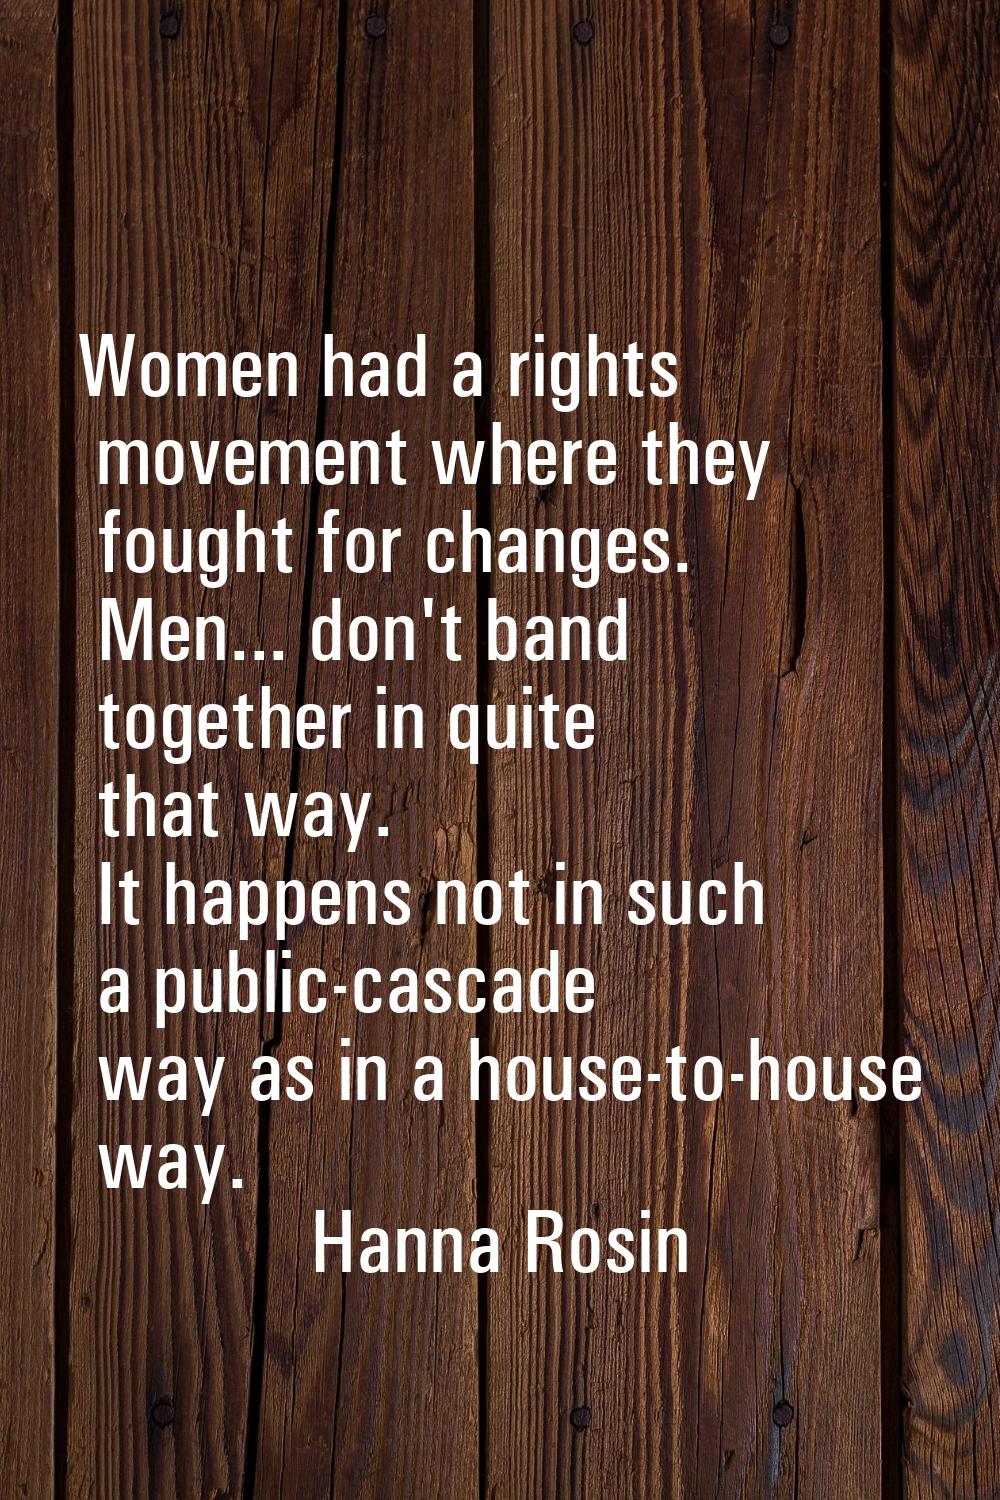 Women had a rights movement where they fought for changes. Men... don't band together in quite that